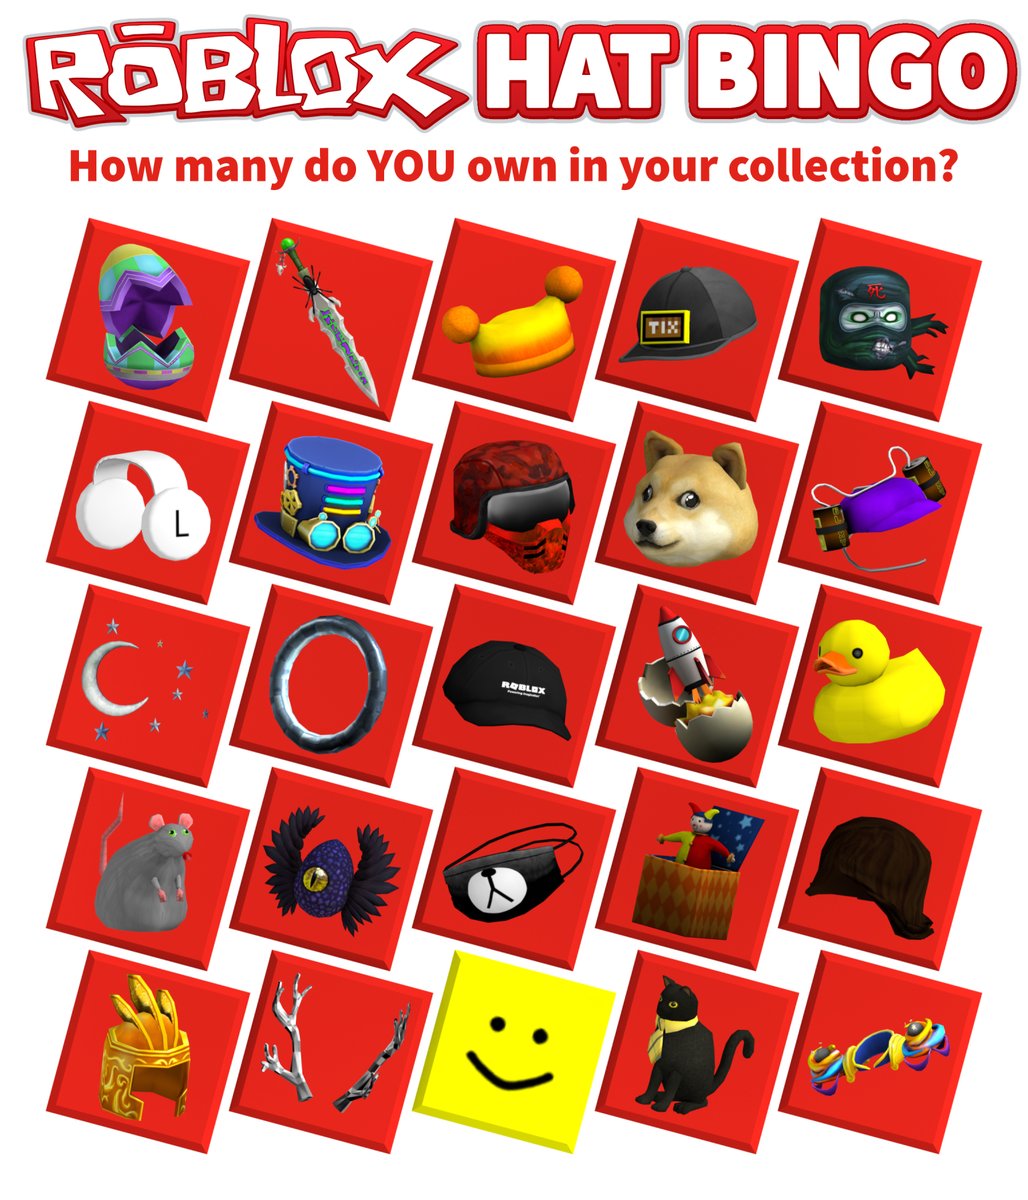 Ivy On Twitter Are You A Fan Of The Many Hats That Have Released Over The Years Now S The Time To Play Some Roblox Hat Bingo Mark The Hats You Own And - a bingo roblox